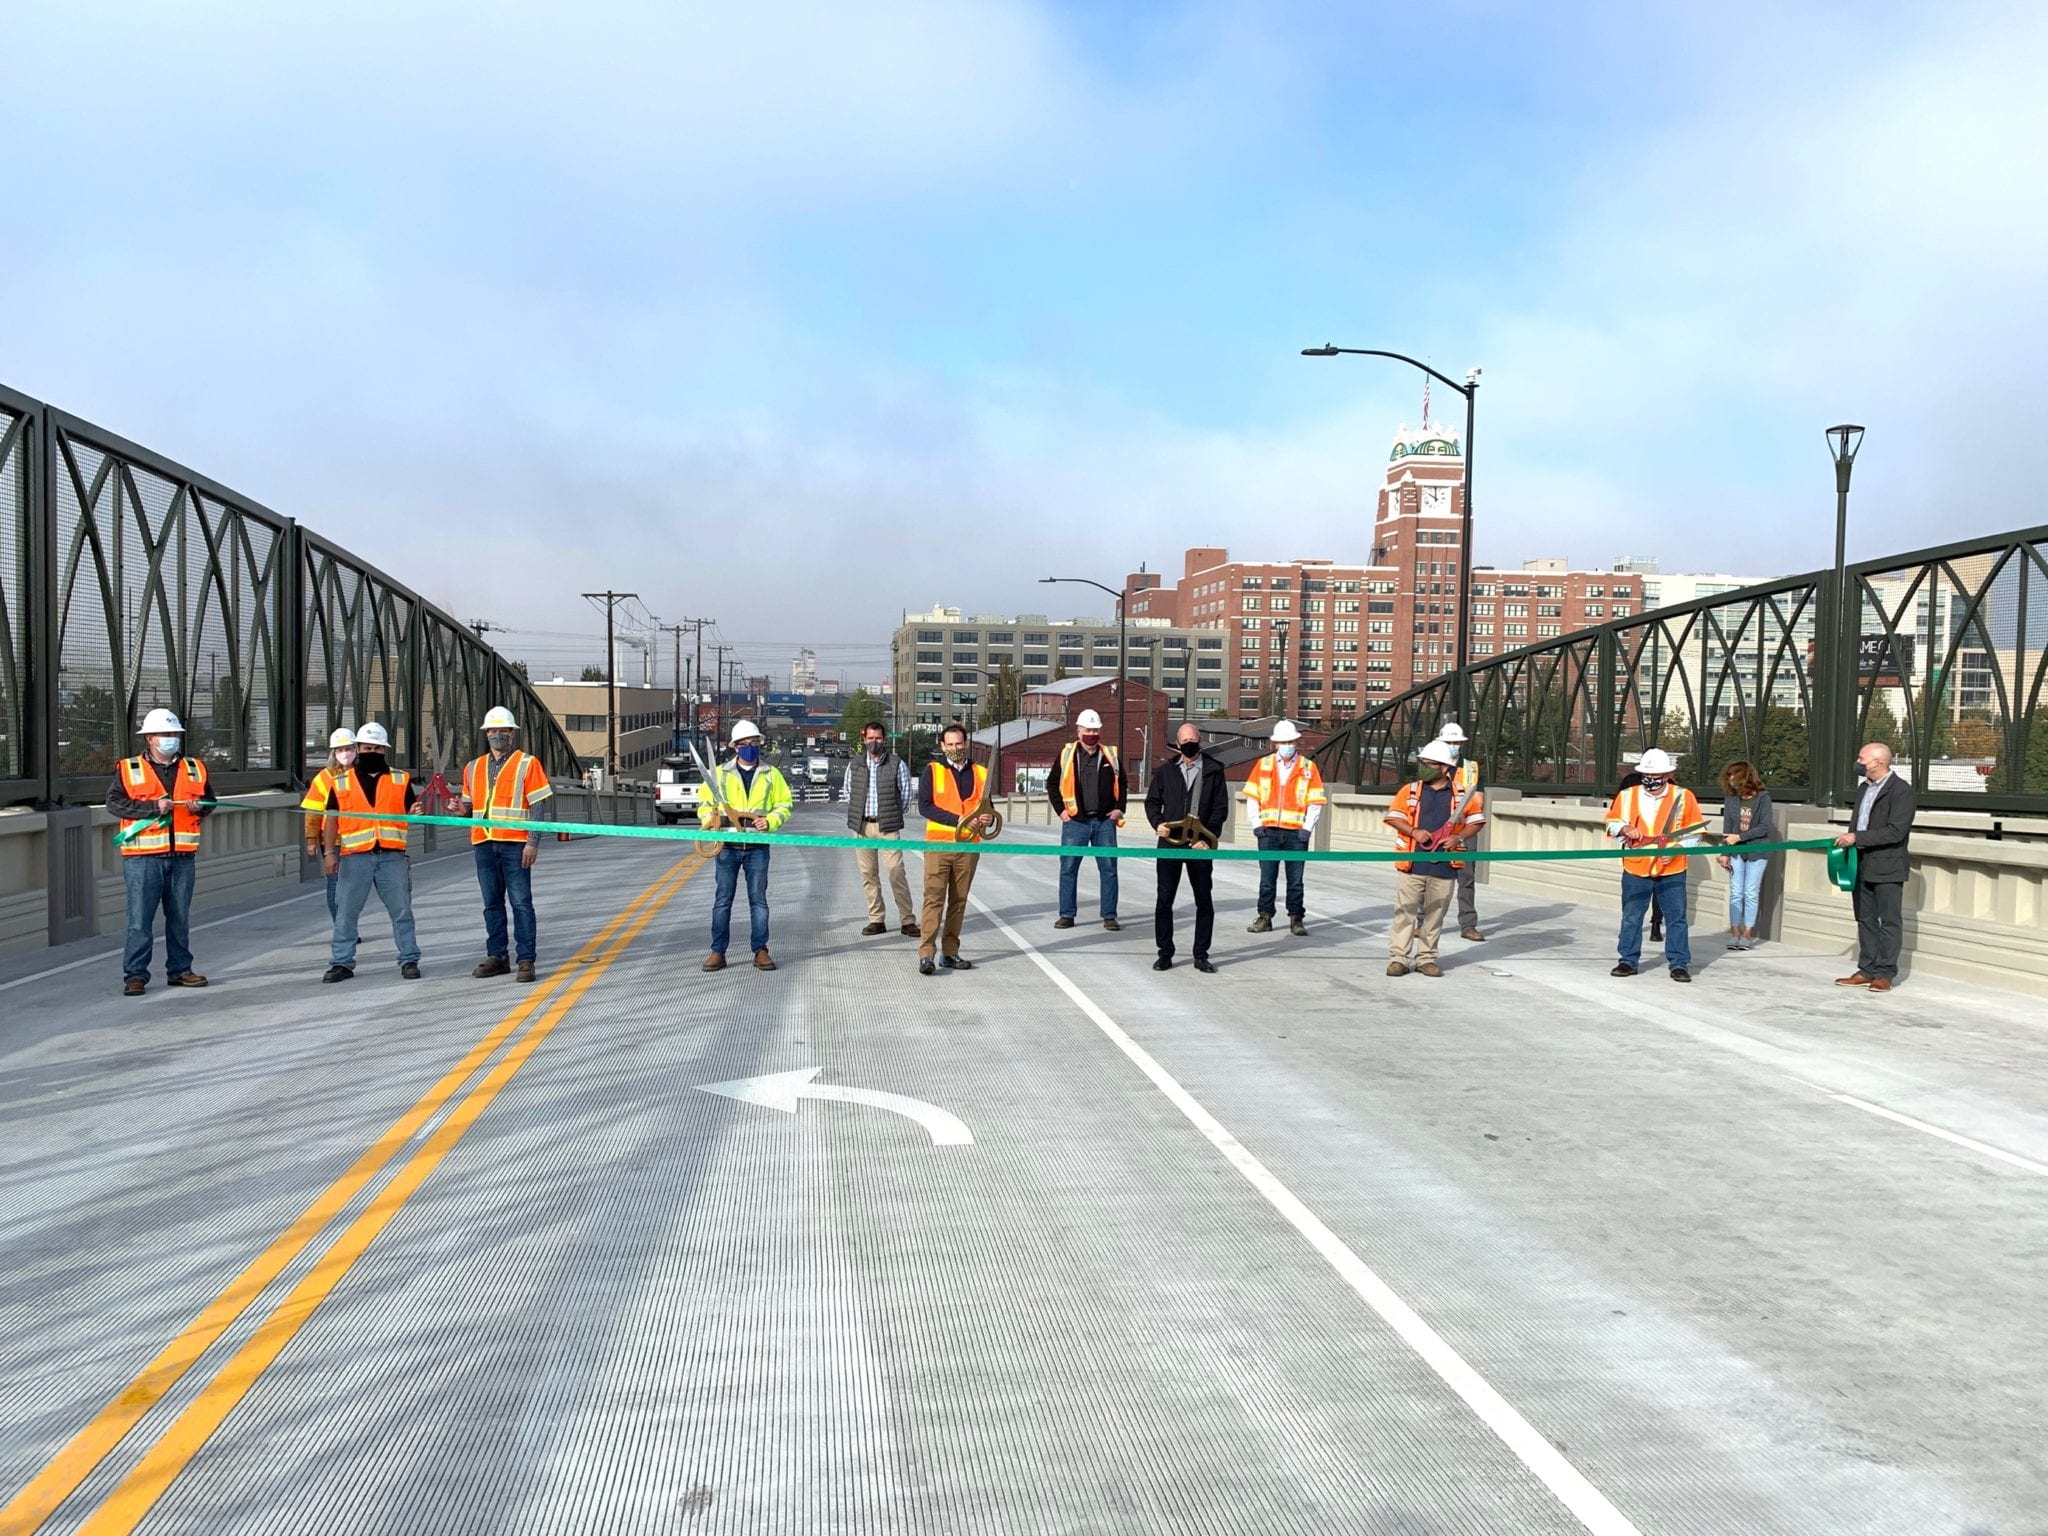 We held a small ribbon-cutting ceremony to mark the completion of the Lander St Bridge!